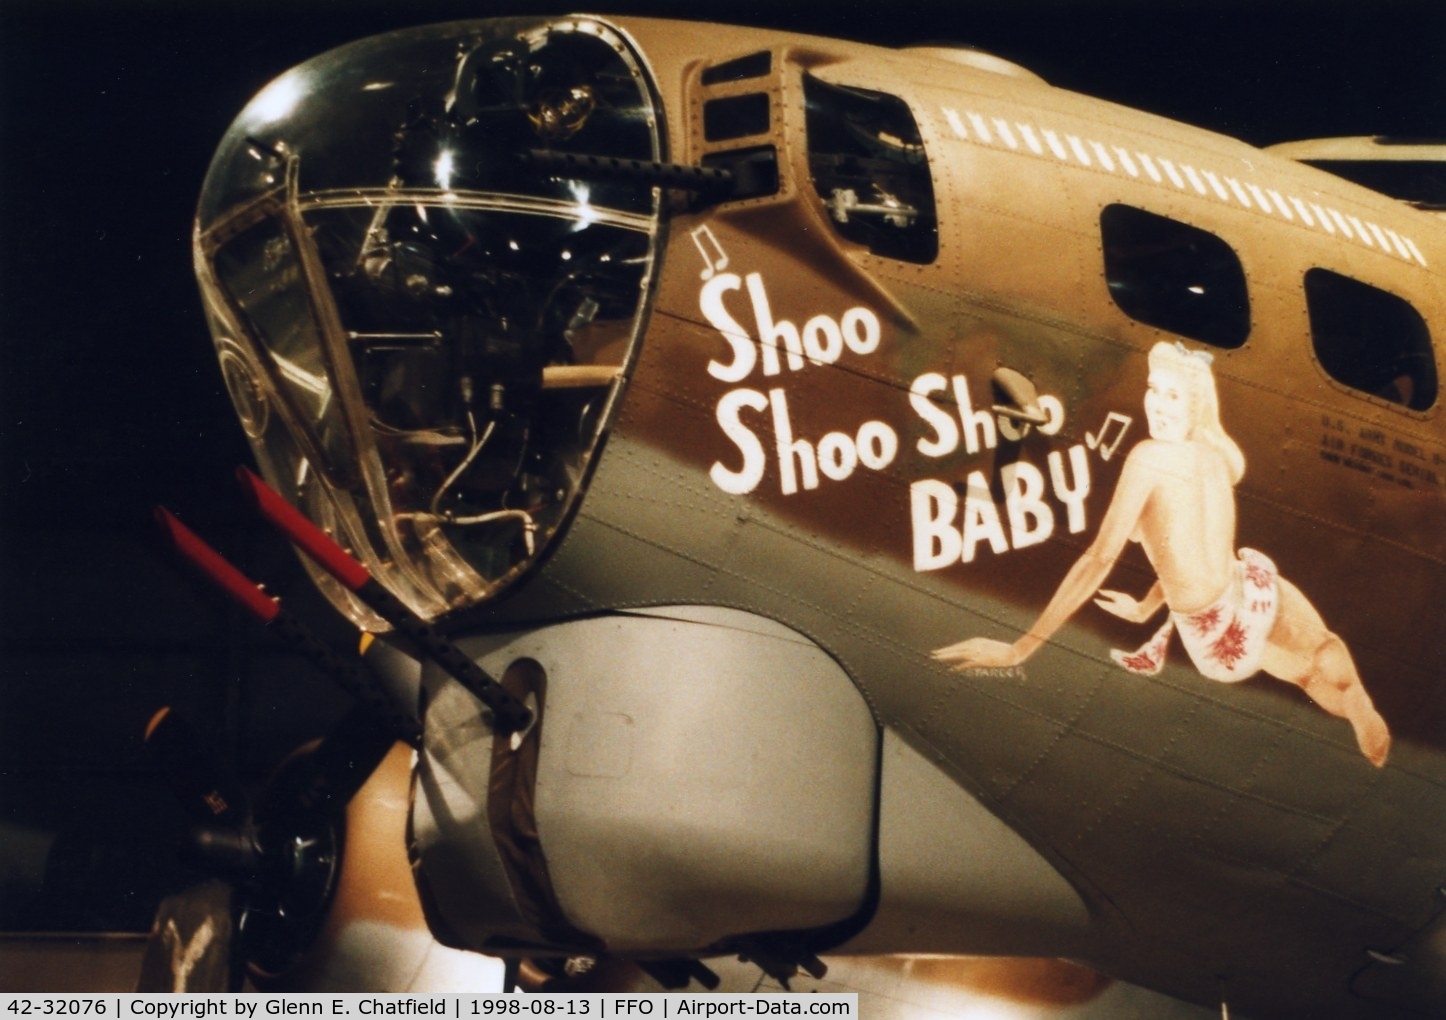 42-32076, 1942 Boeing B-17G Flying Fortress C/N 7190, Nose art of the B-17G at the National Museum of the U.S. Air Force